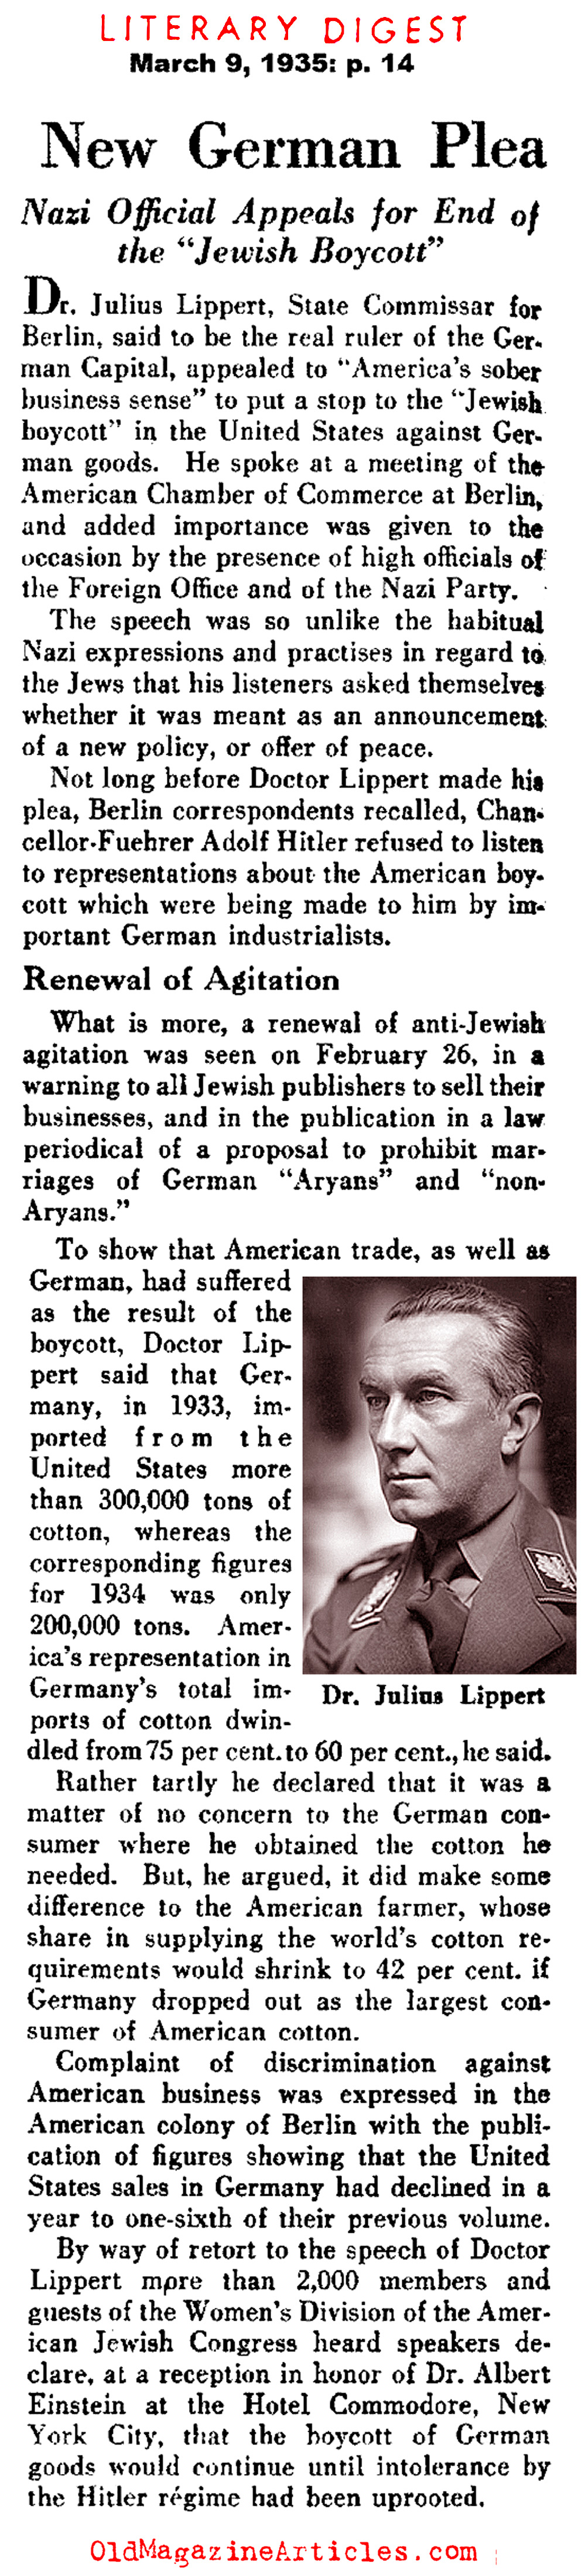 Jewish Americans Boycotted German Products (Literary Digest, 1935)